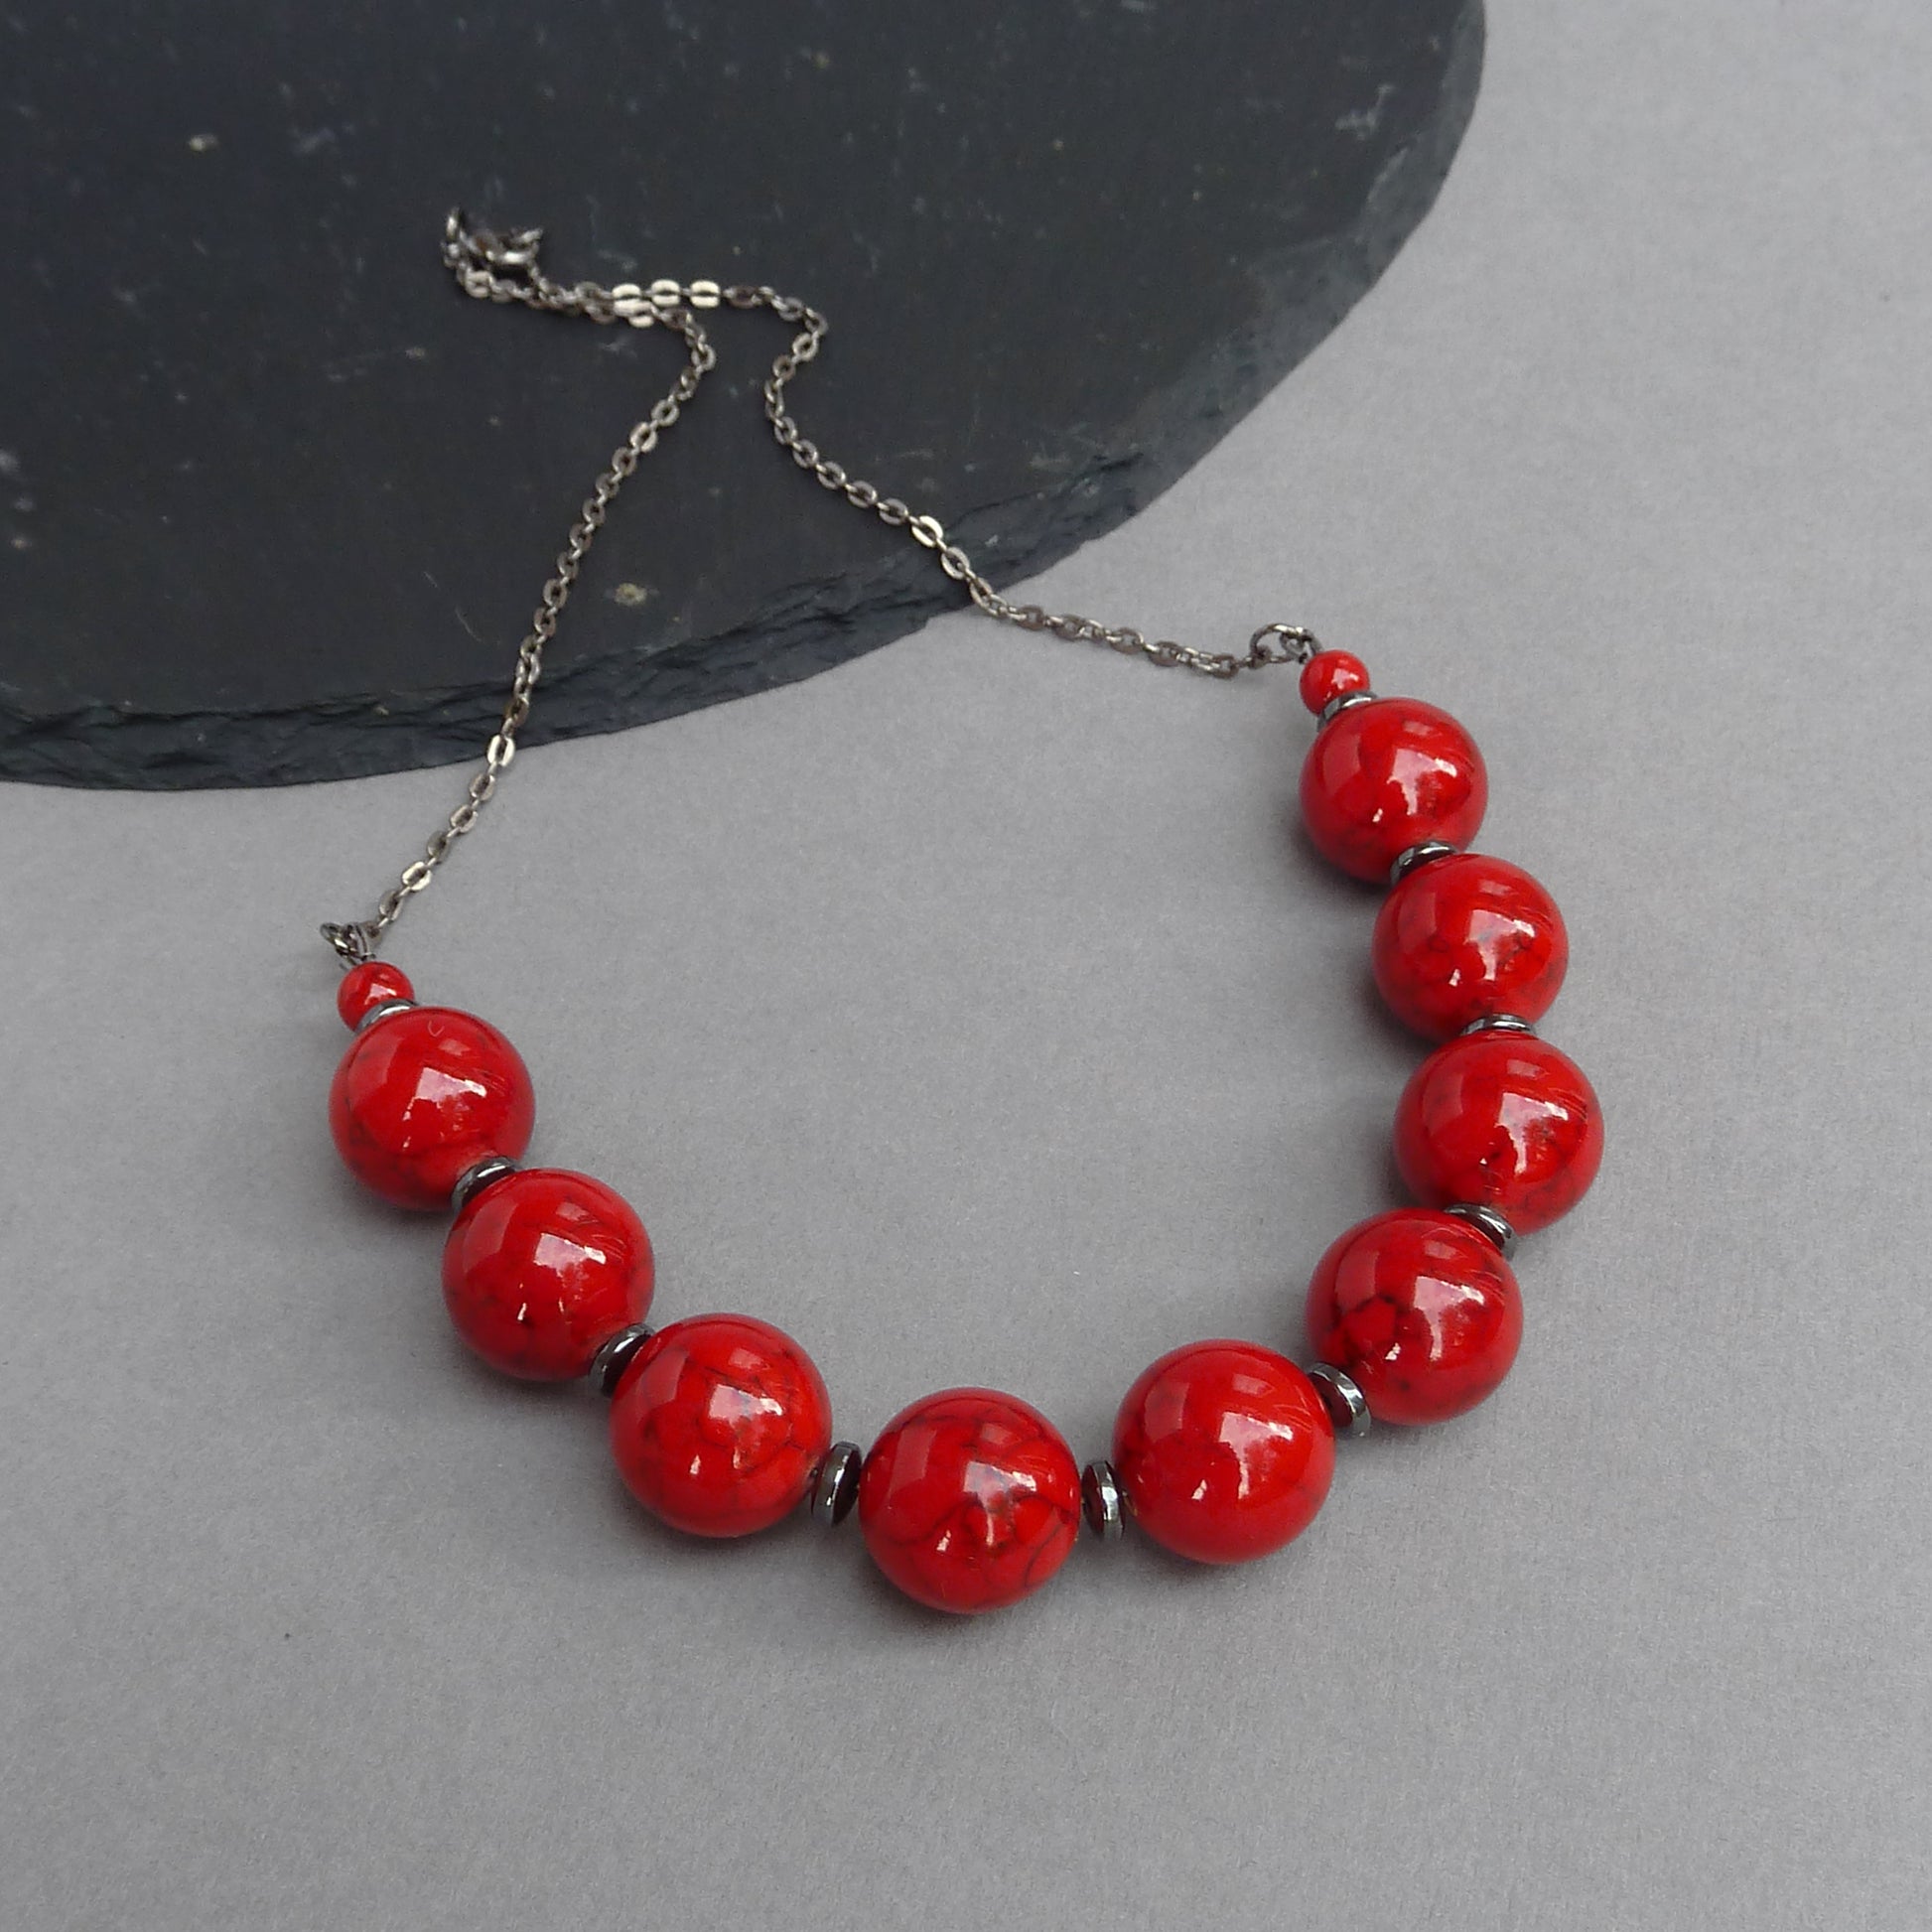 Chunky bright red statement necklace